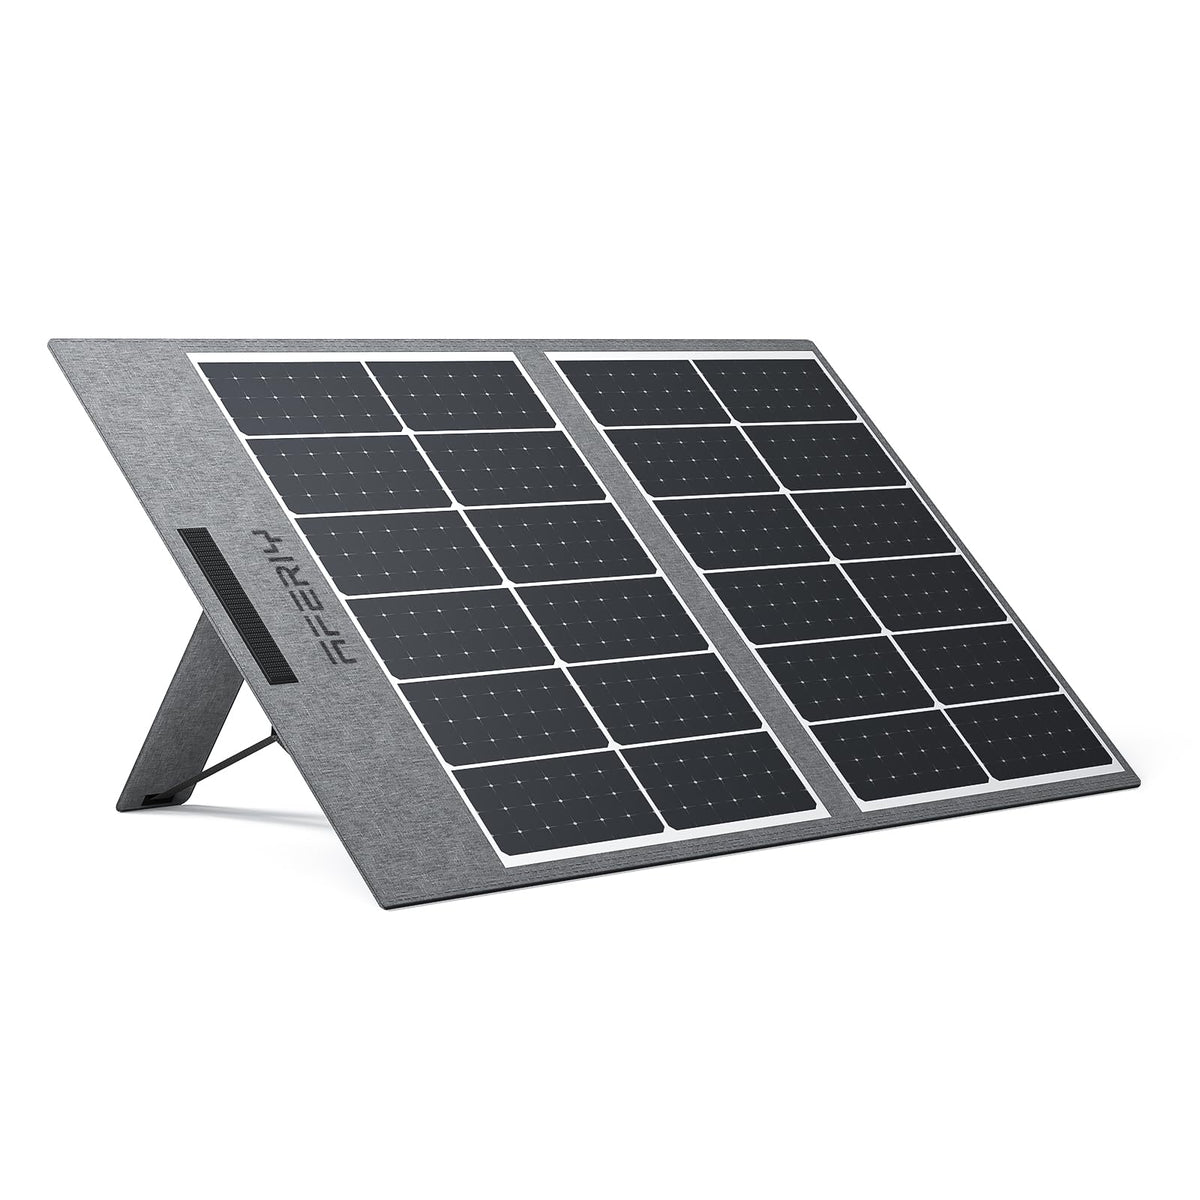 Front view of Aferiy AF-S65 65W portable mini solar panel - 2 foldable design